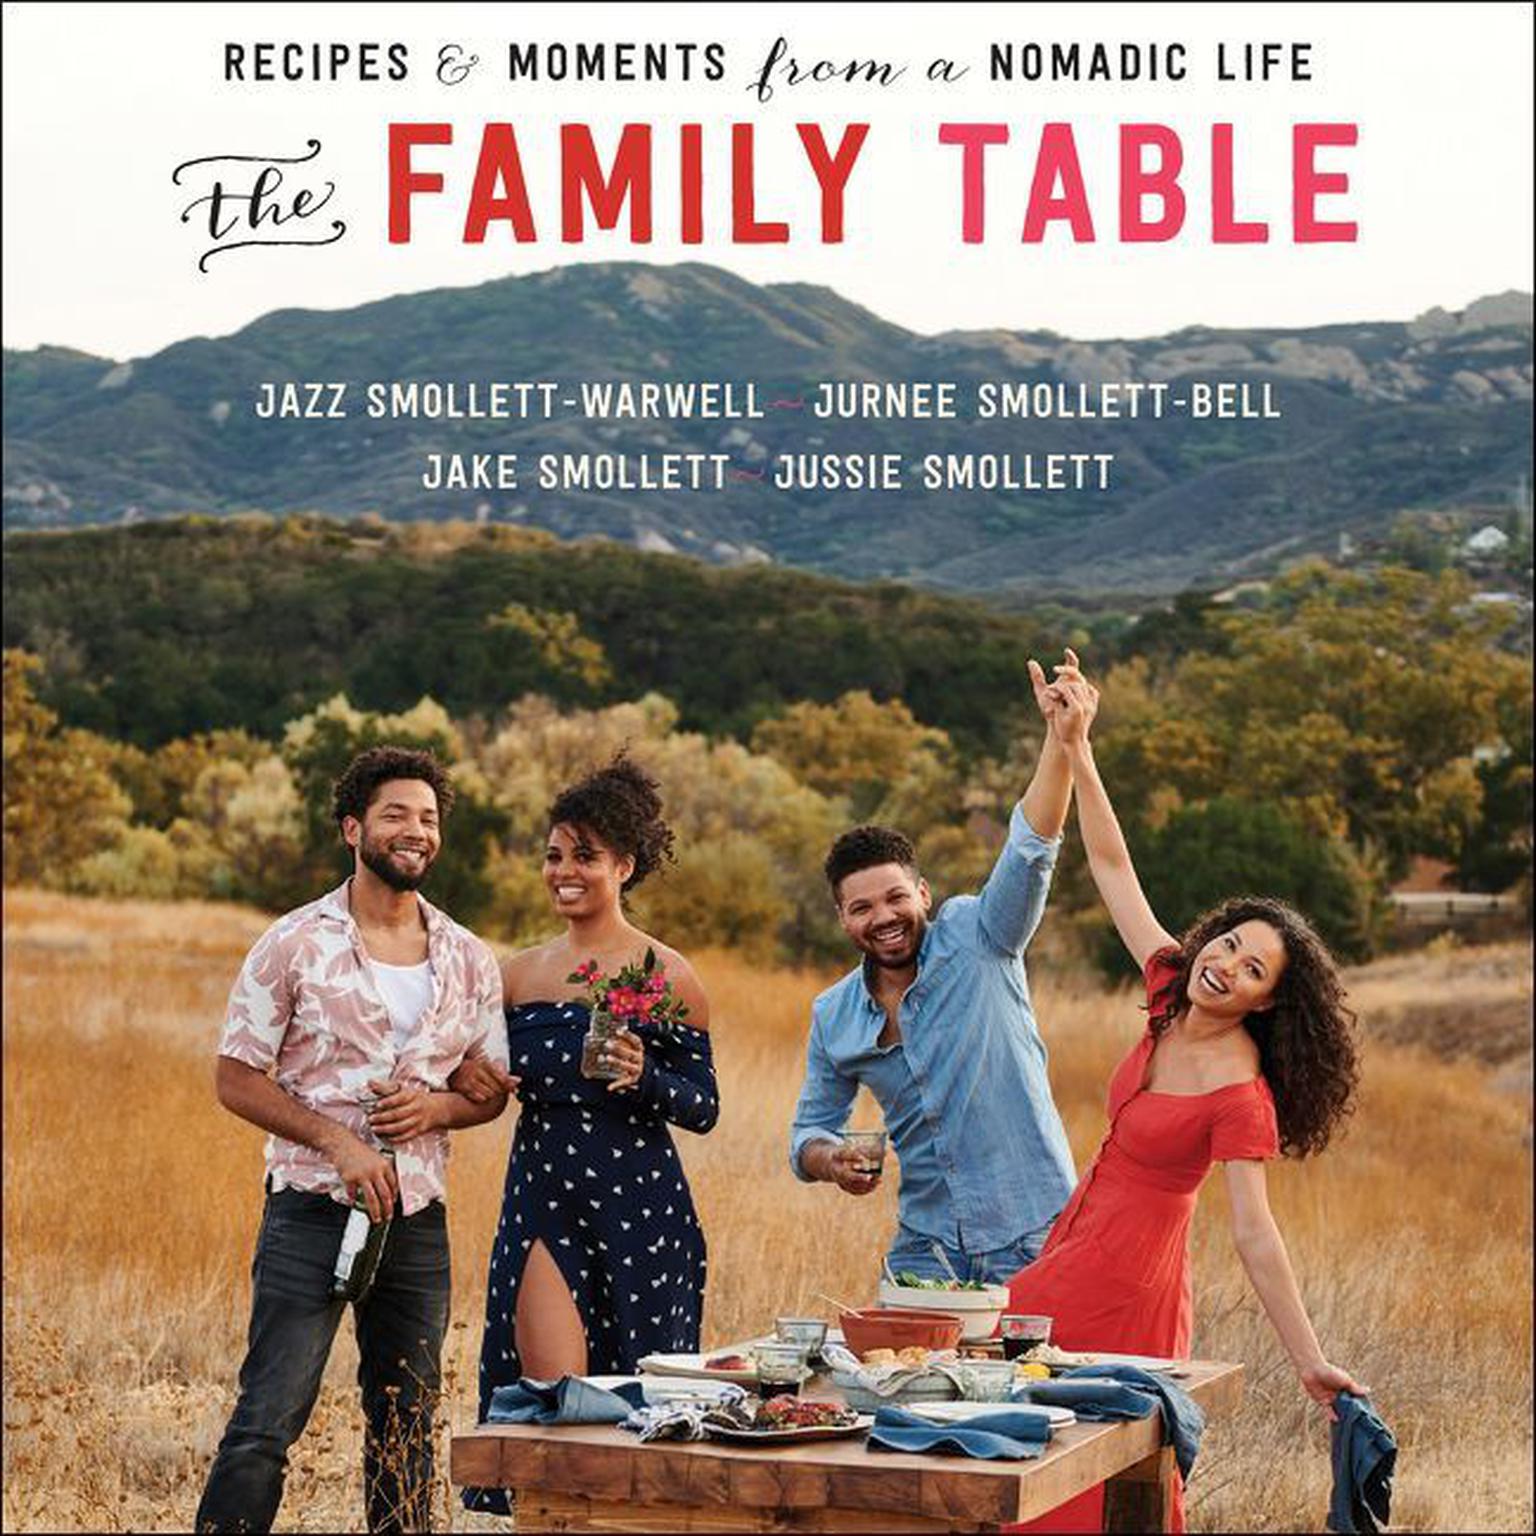 The Family Table: Recipes and Moments from a Nomadic Life Audiobook, by Jazz Smollett-Warwell